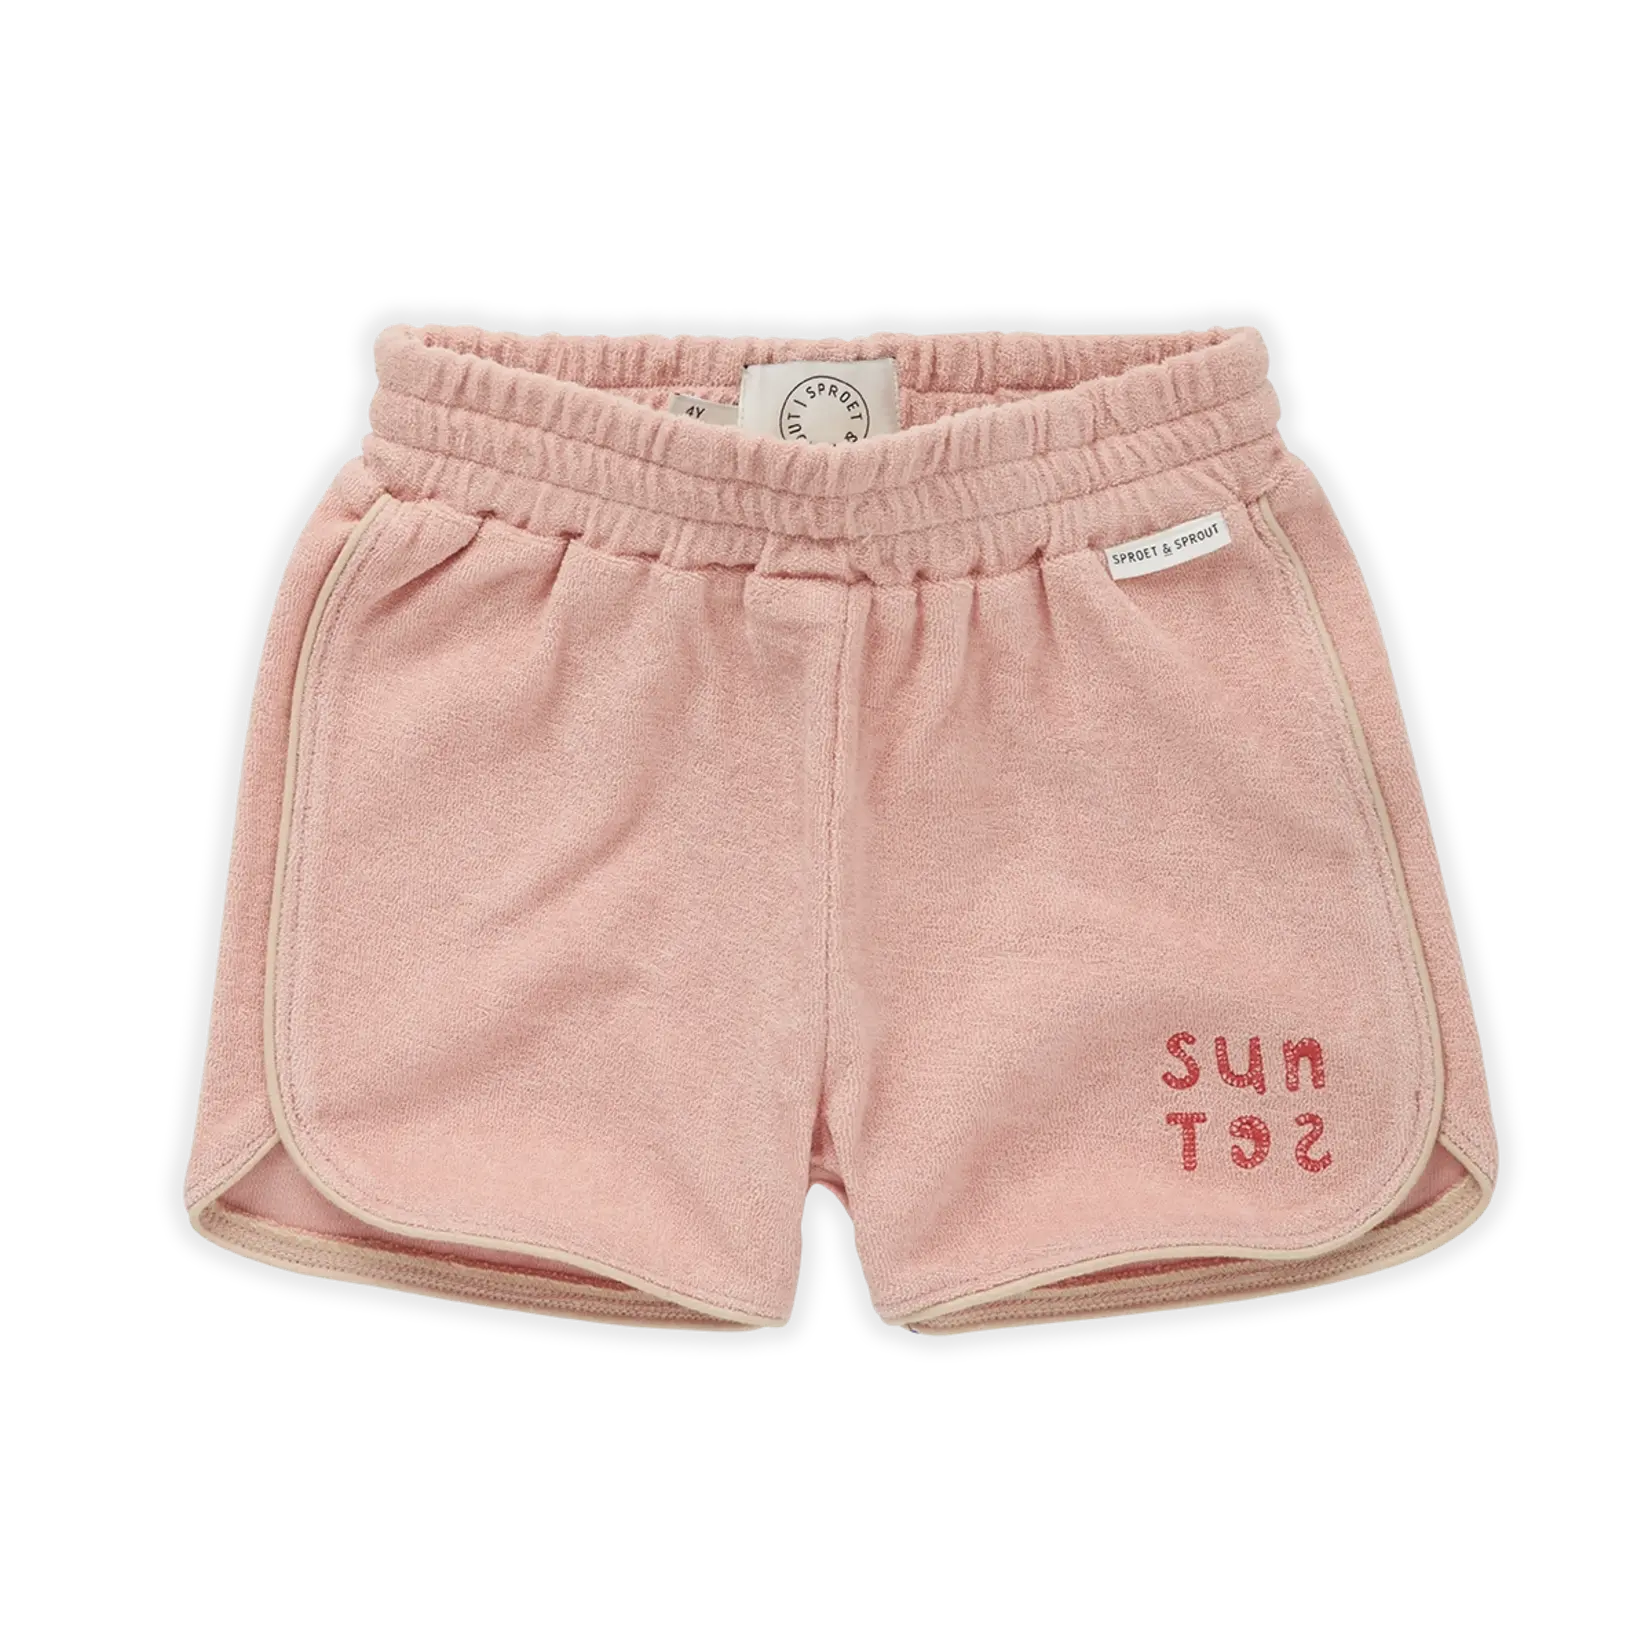 Sproet & Sprout Sproet & Sprout - Terry sport short Sunset - Blossom